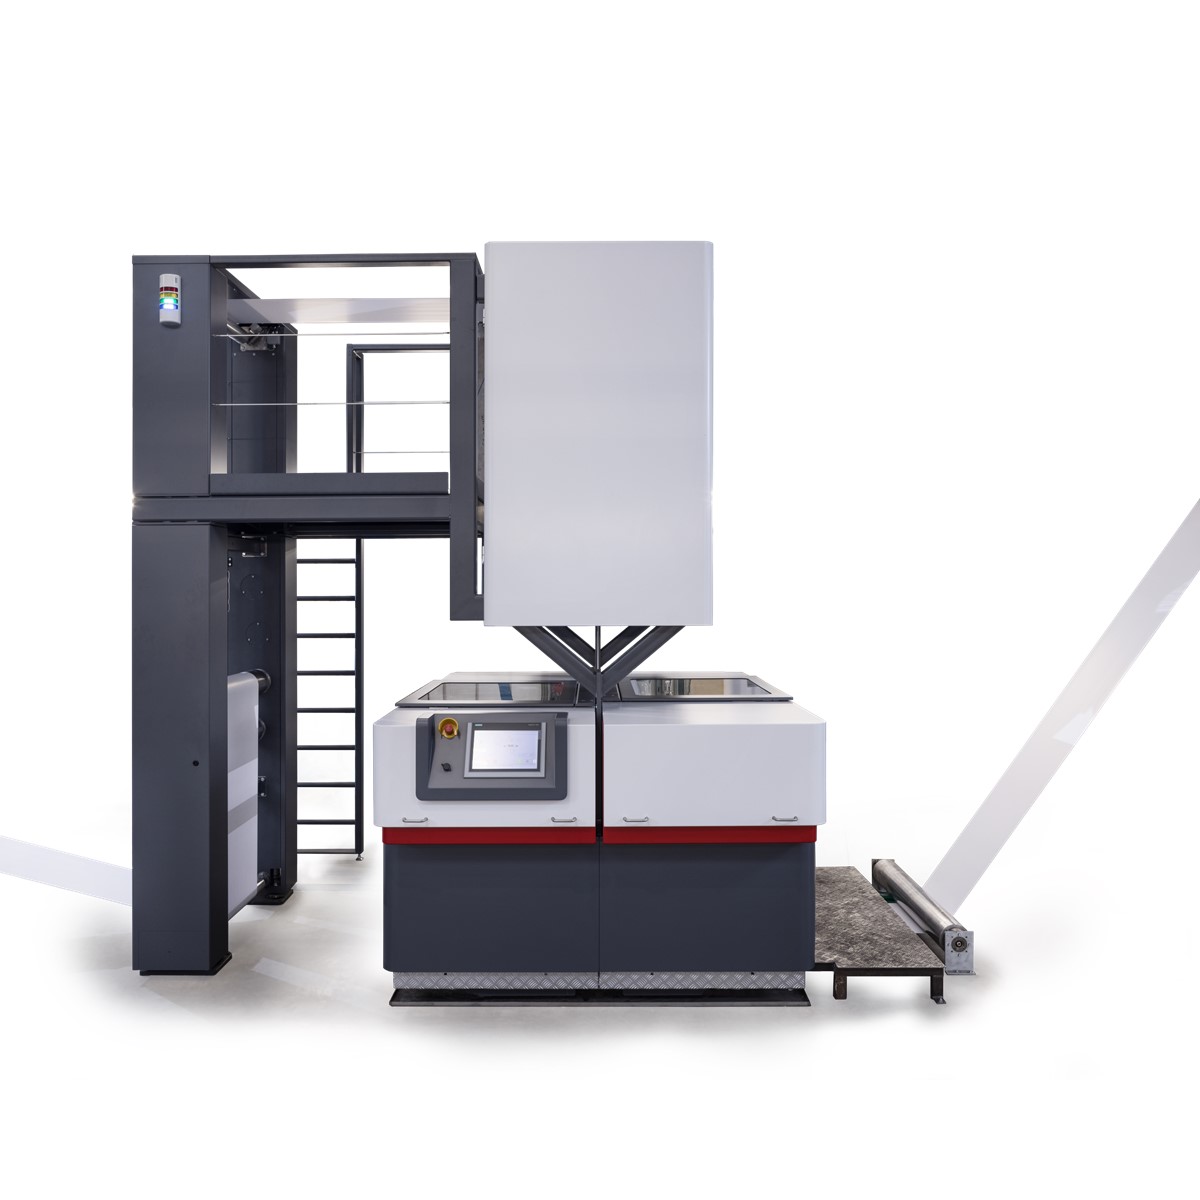 Contiweb Variable Coater2